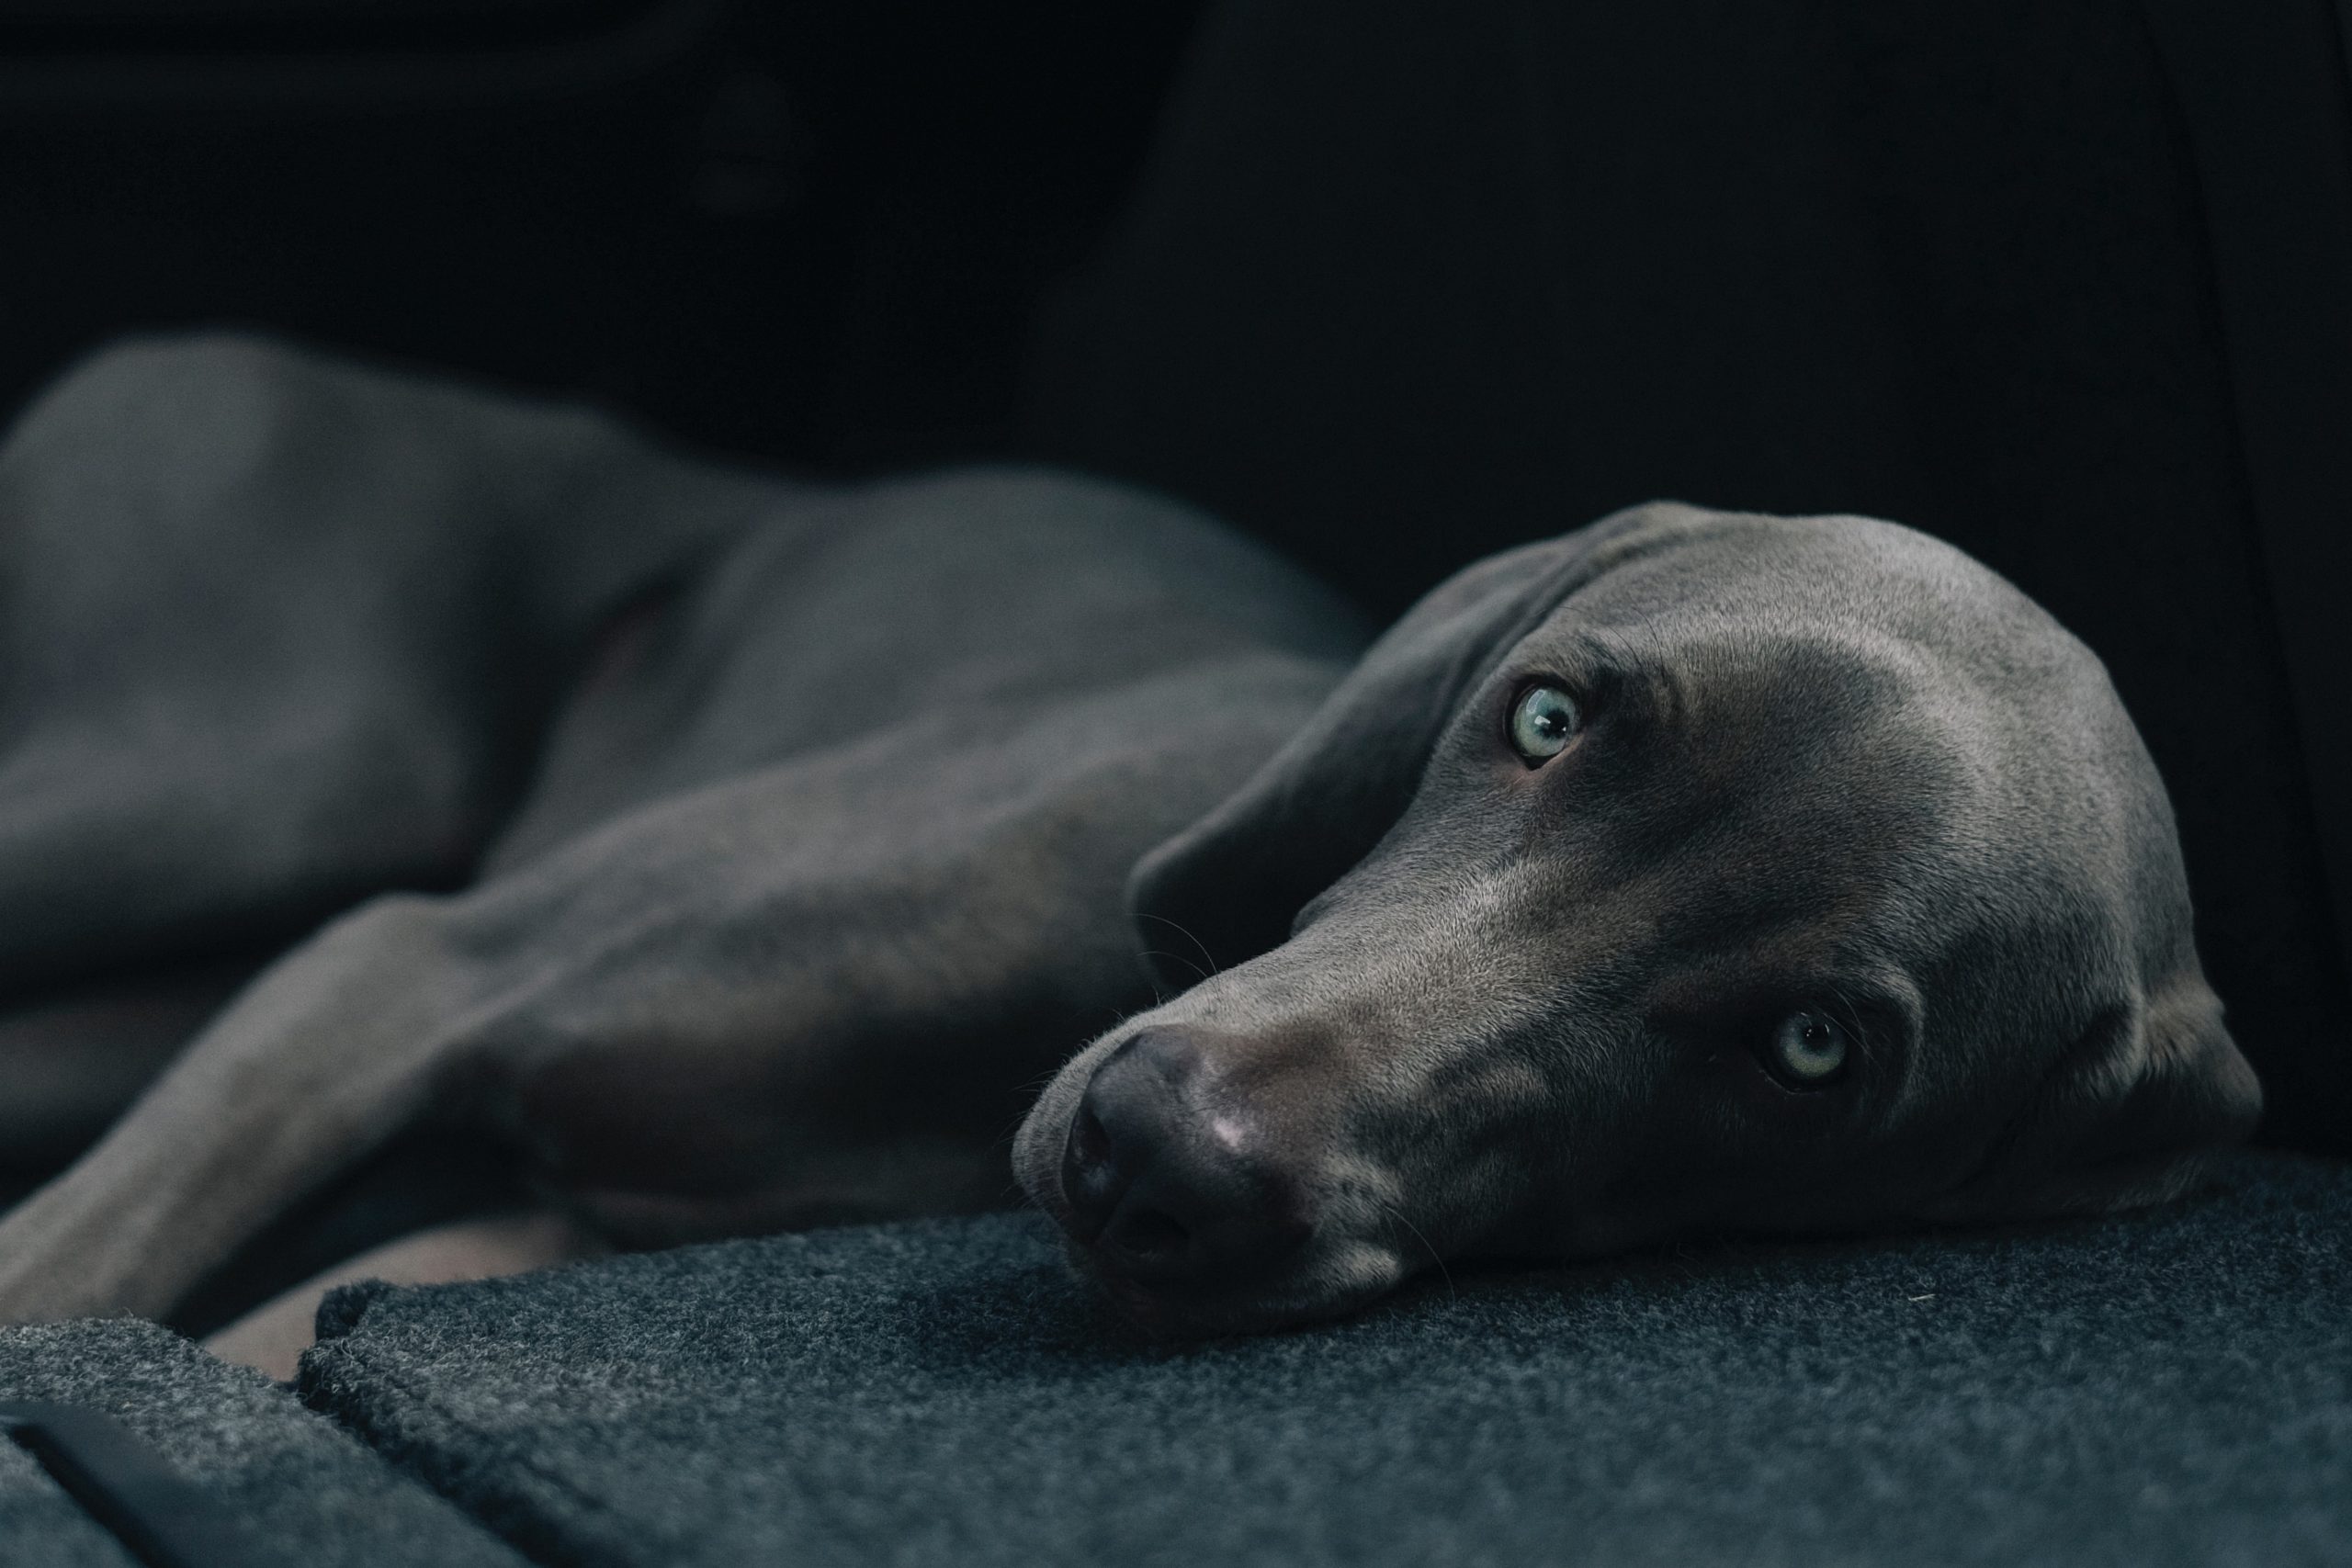 Blue Weimaraner: The controversial dog